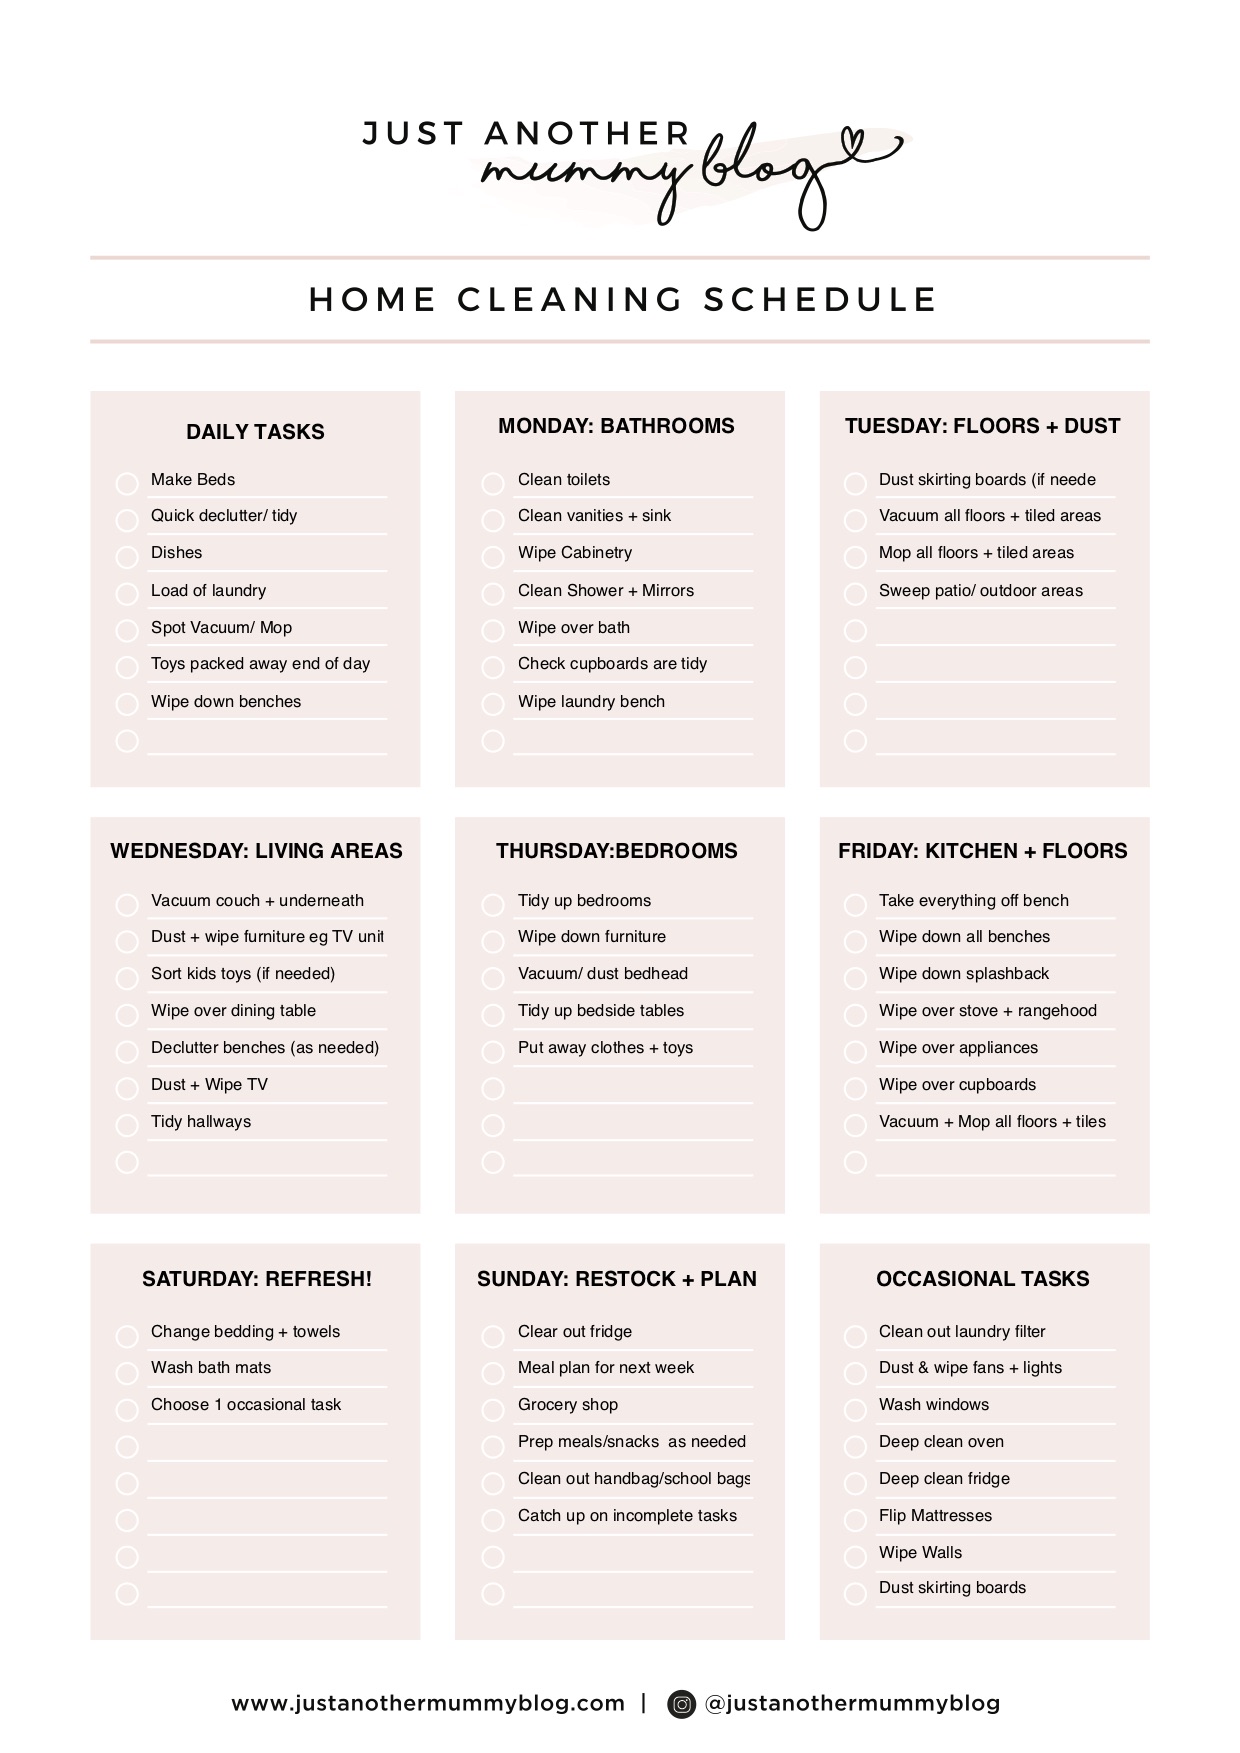 https://www.justanothermummyblog.com/wp-content/uploads/2019/02/CLEANING-SCHEDULE-Just-Another-Mummy-Blog-1.jpg